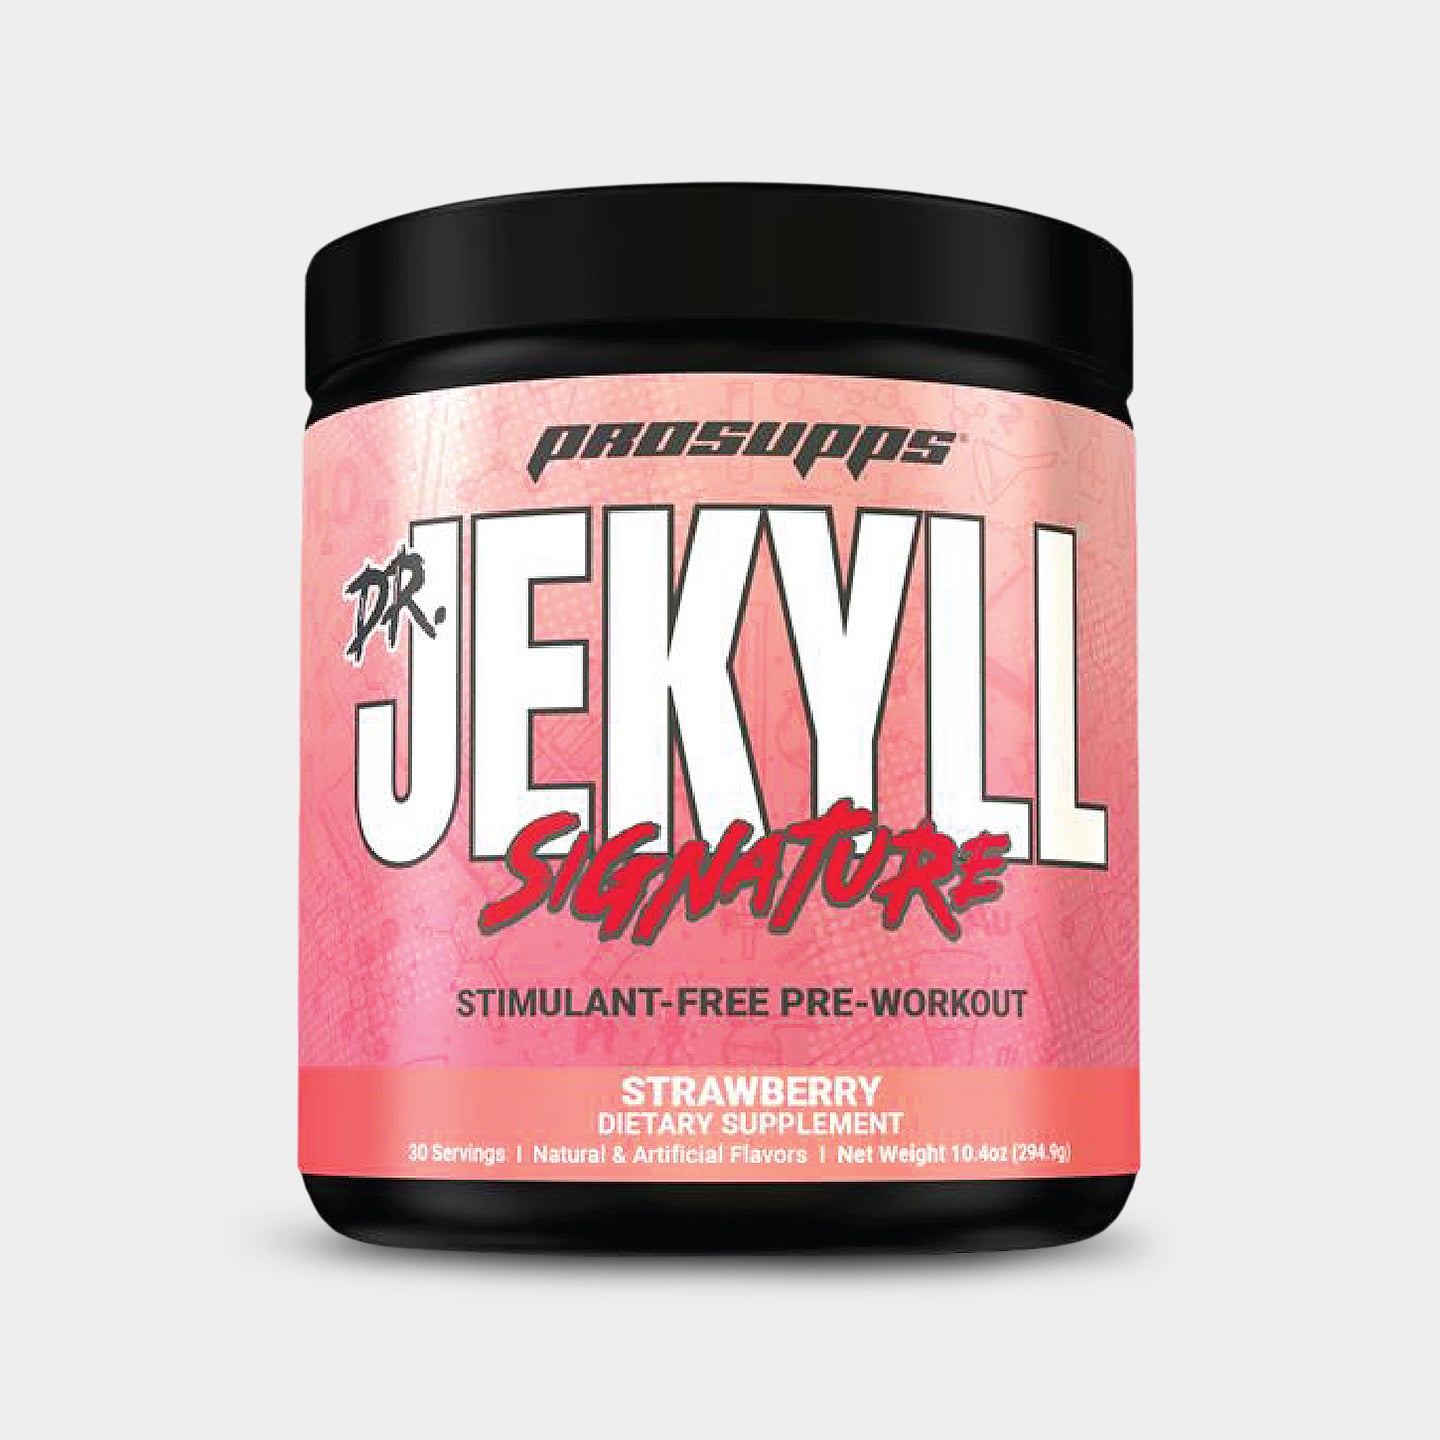 Pro Supps Dr. Jekyll Signature, Strawberry, 30 Servings A1